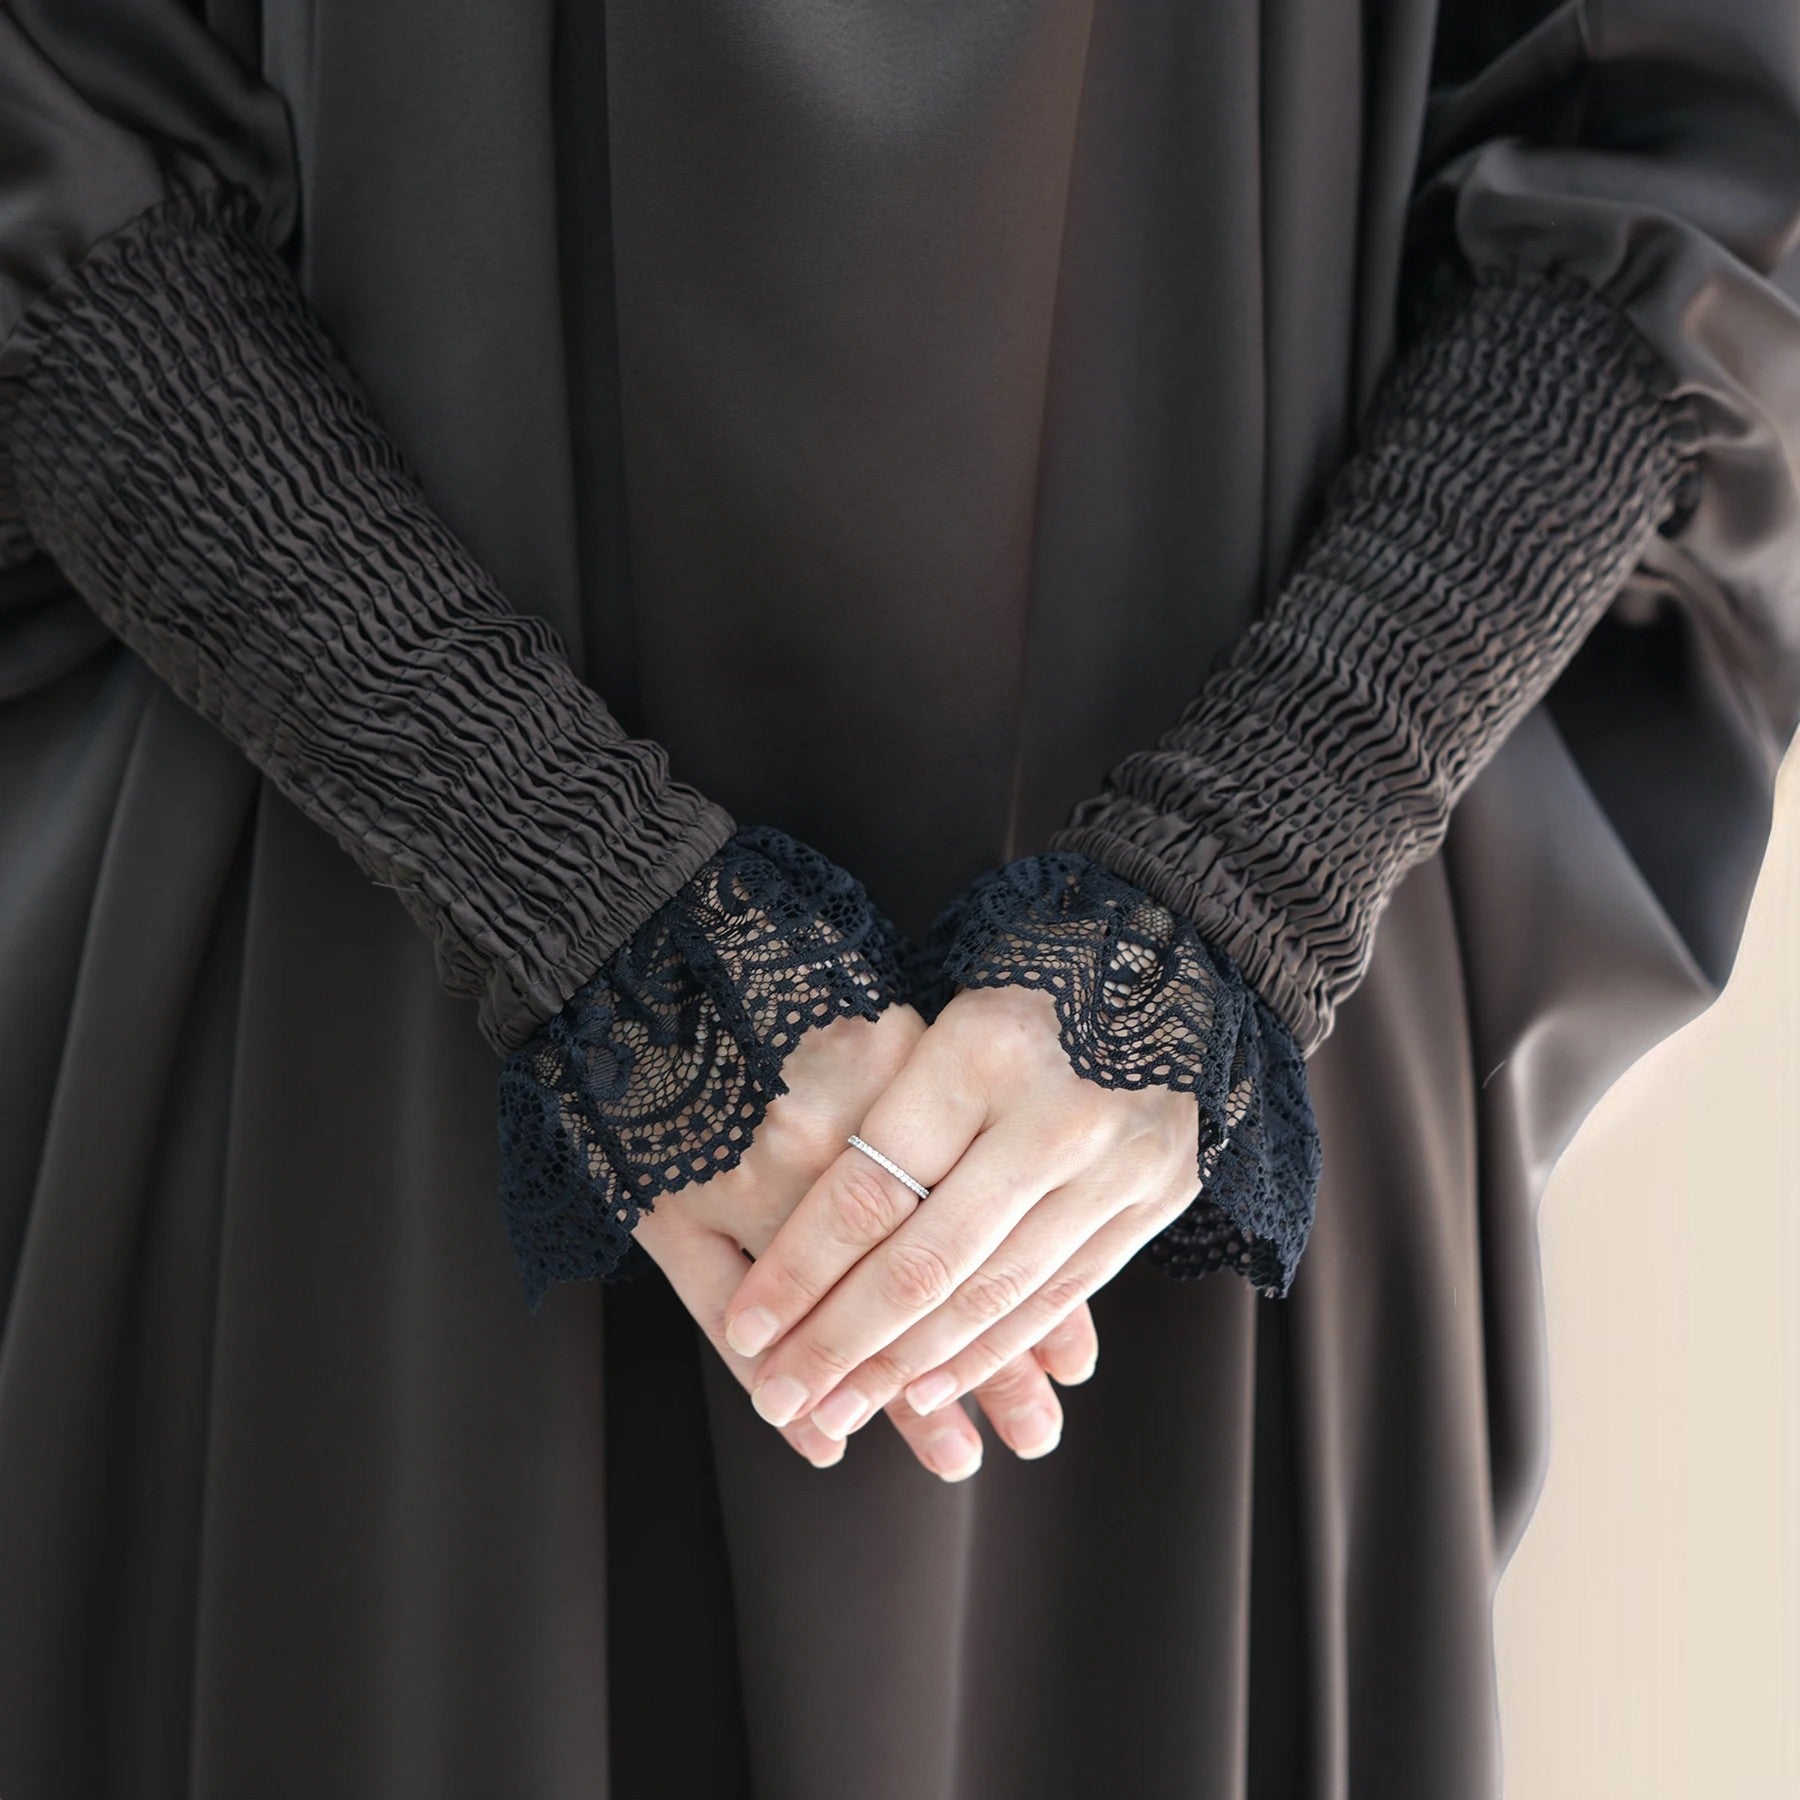 Serenity Ramadan jilbab prayer dress with Ribbed Sleeves and Lace Trim - Try Modest Limited 